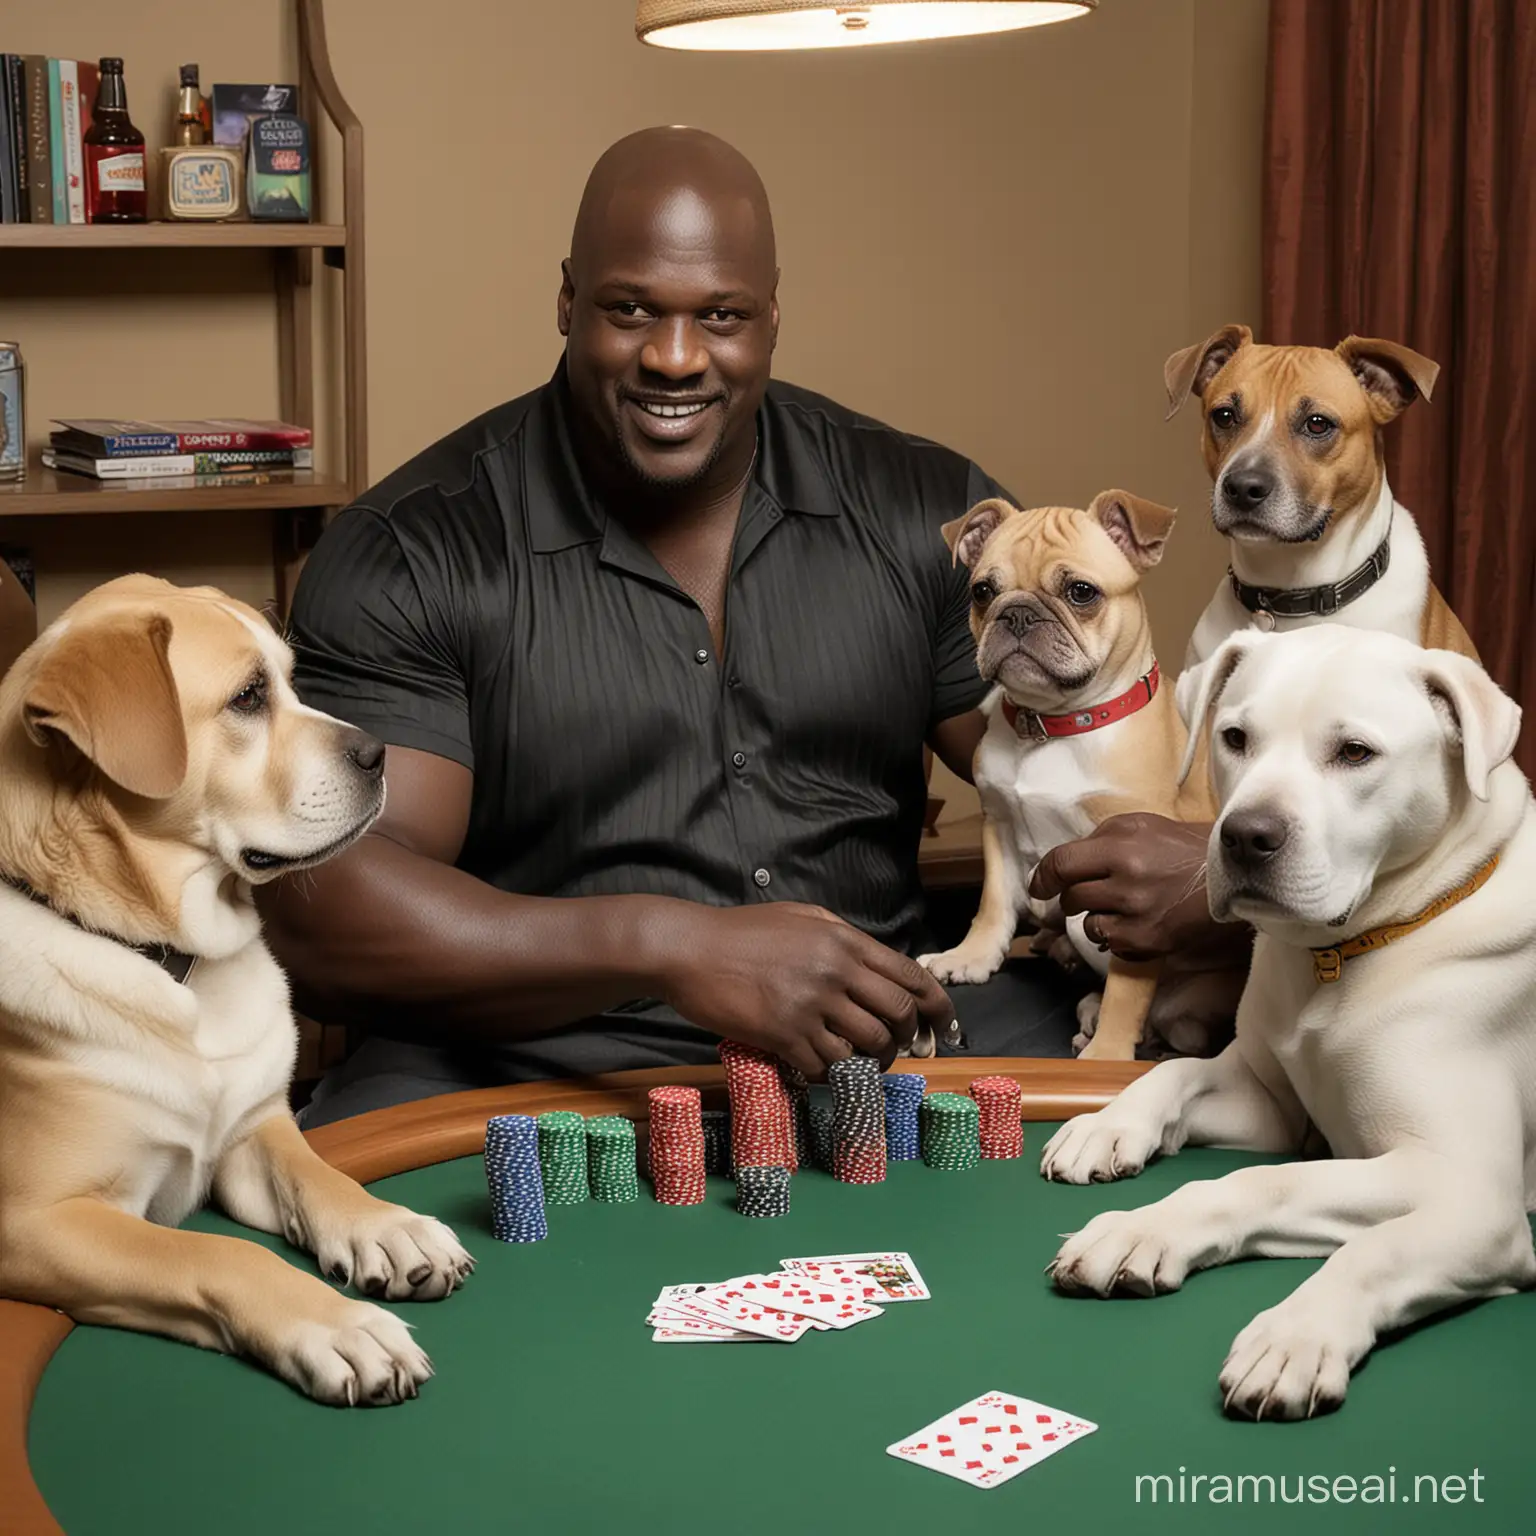 Shaquille O'Neal playing poker with dogs